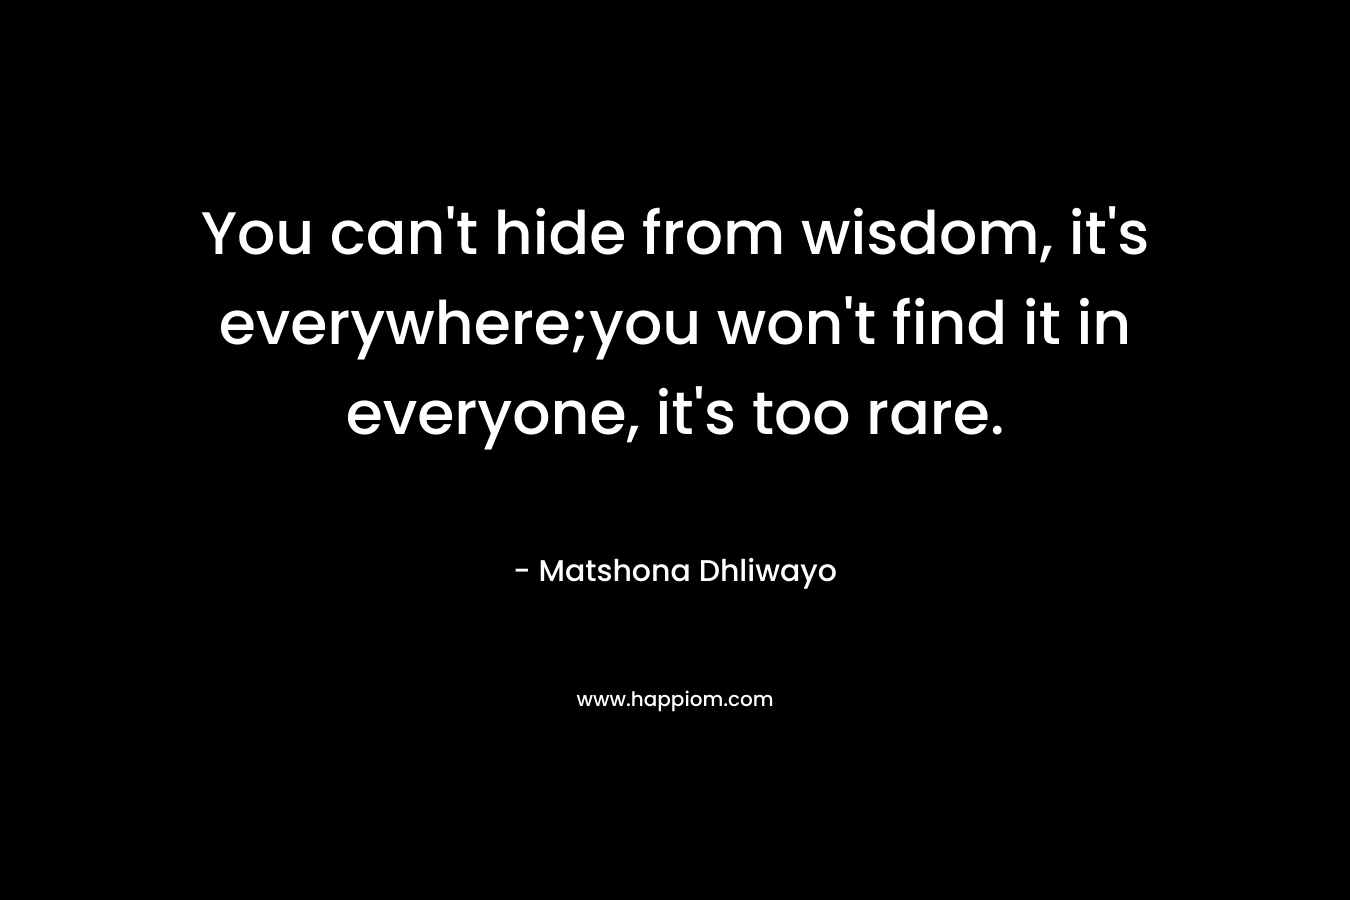 You can't hide from wisdom, it's everywhere;you won't find it in everyone, it's too rare.